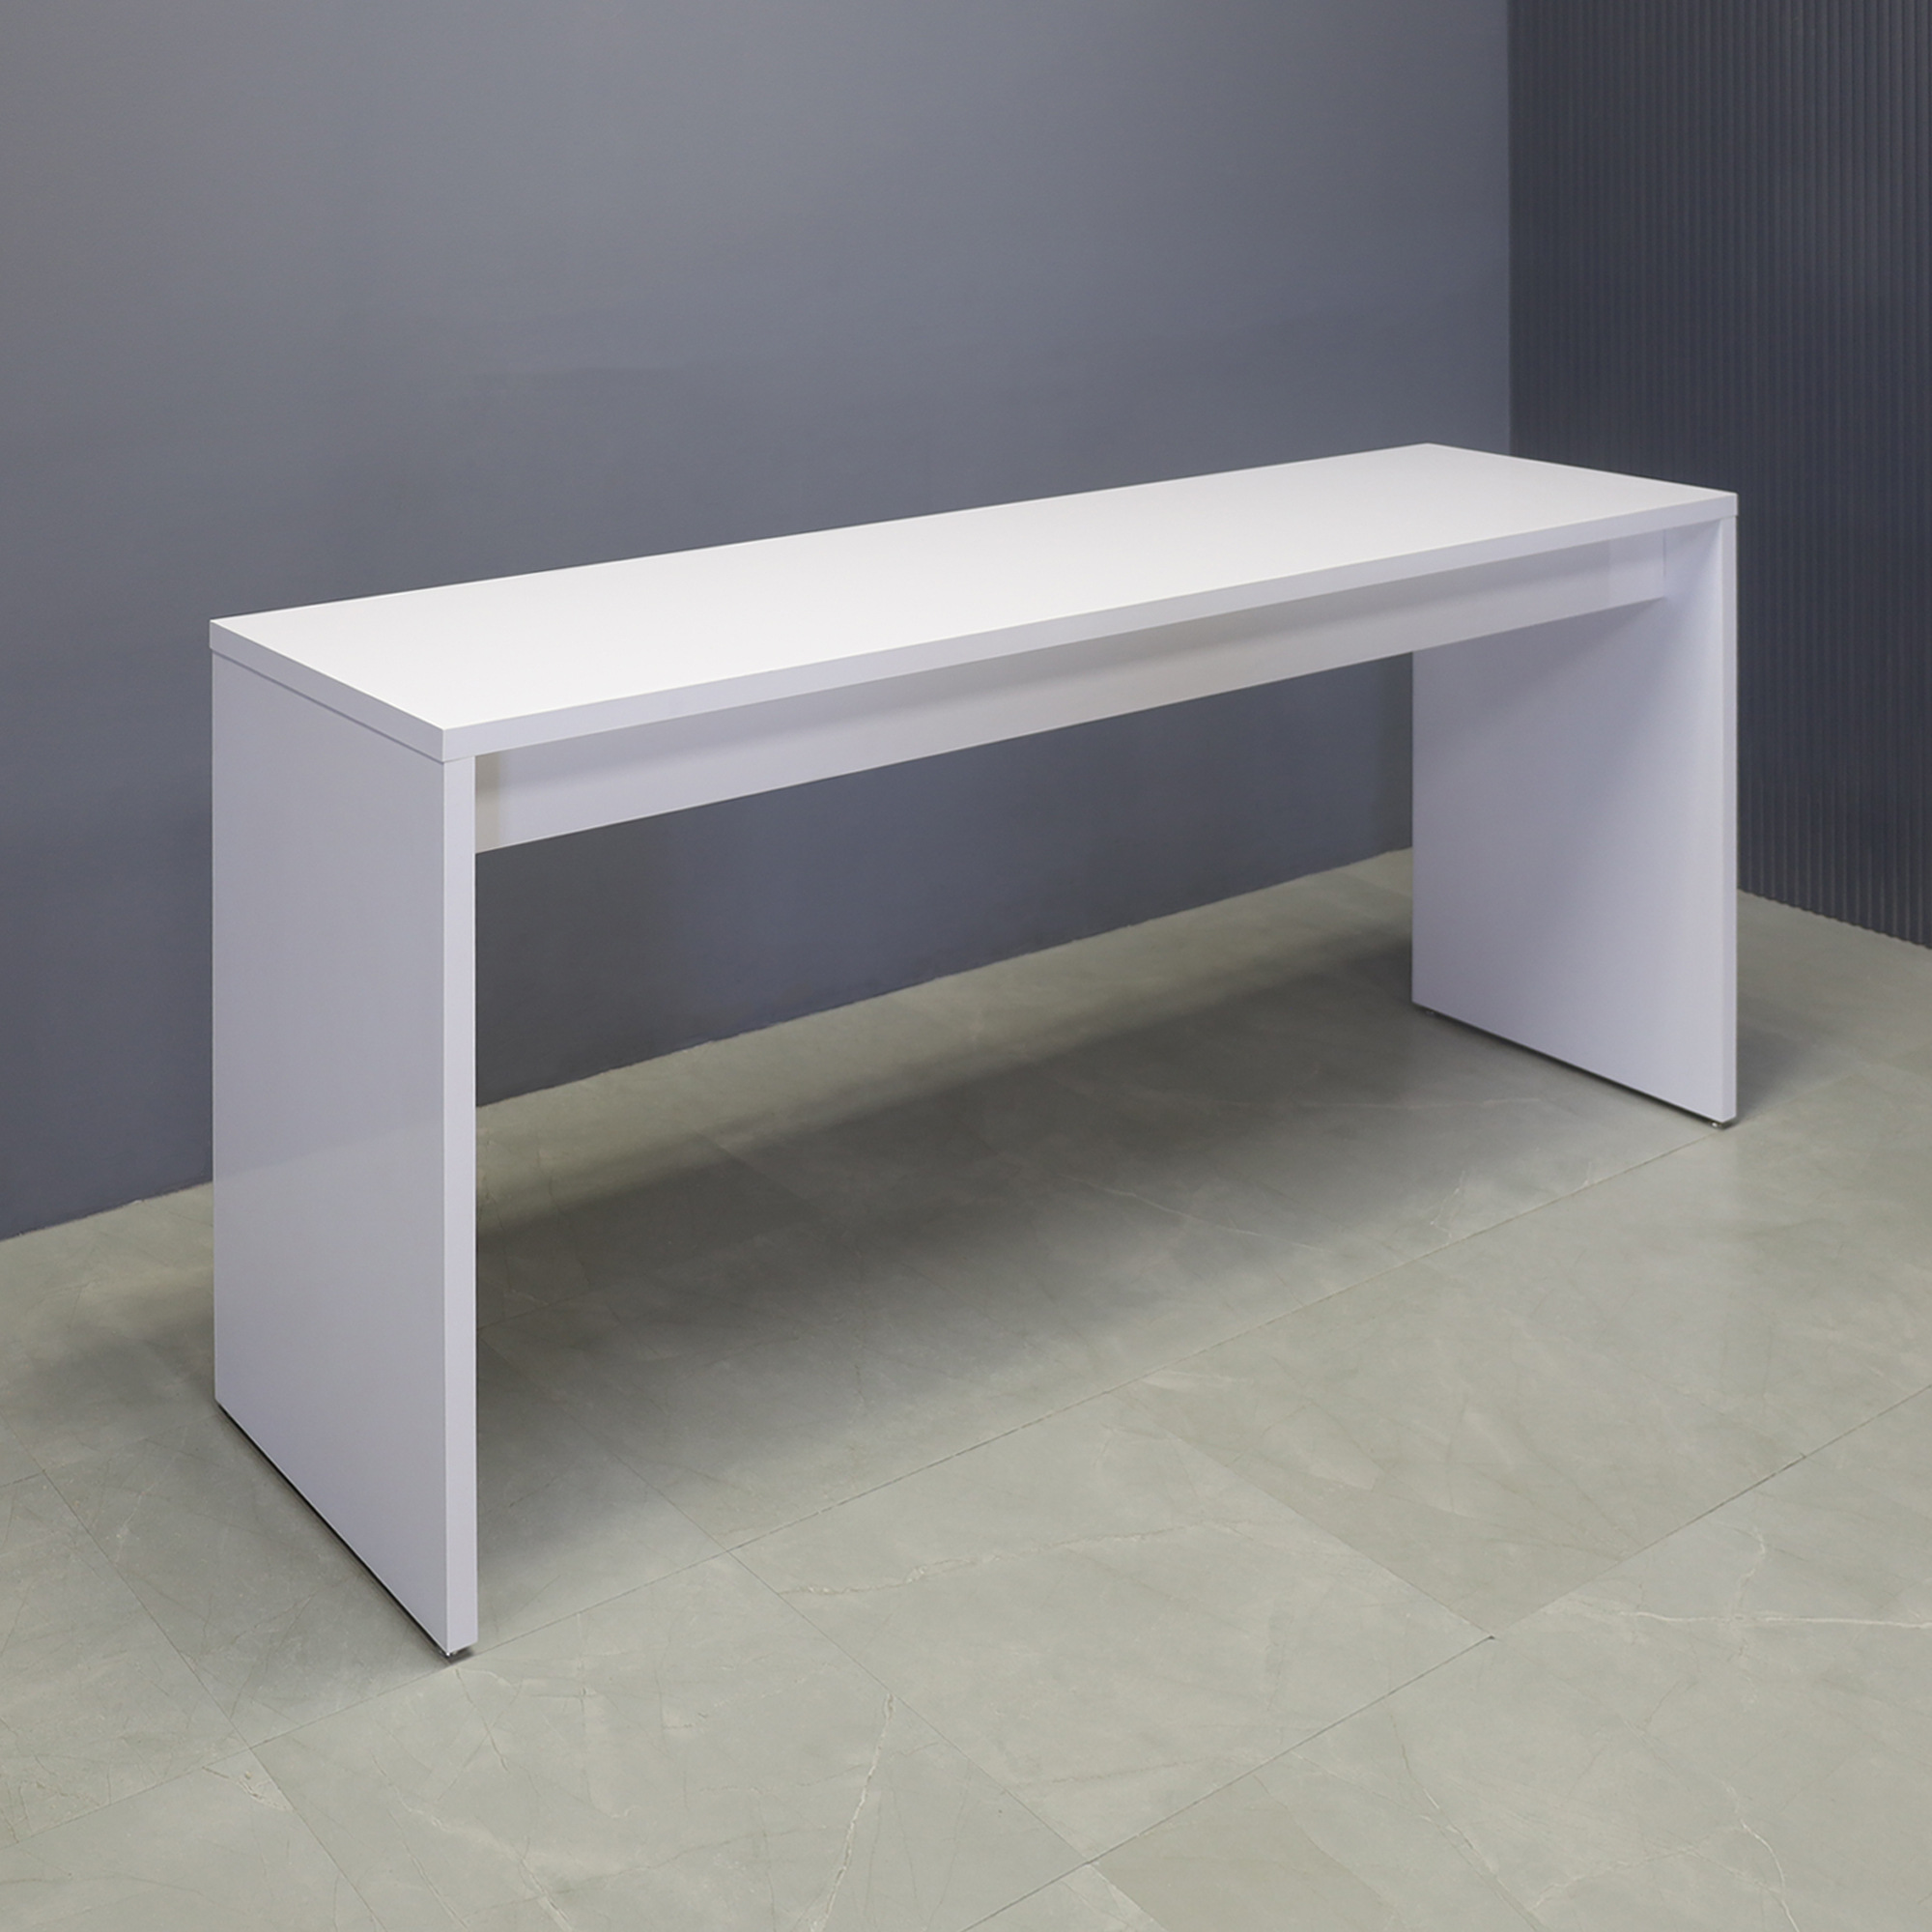 90-inch width x 42-inch height, Ashville Laminate Collaboration Table in white gloss laminate, shown here.